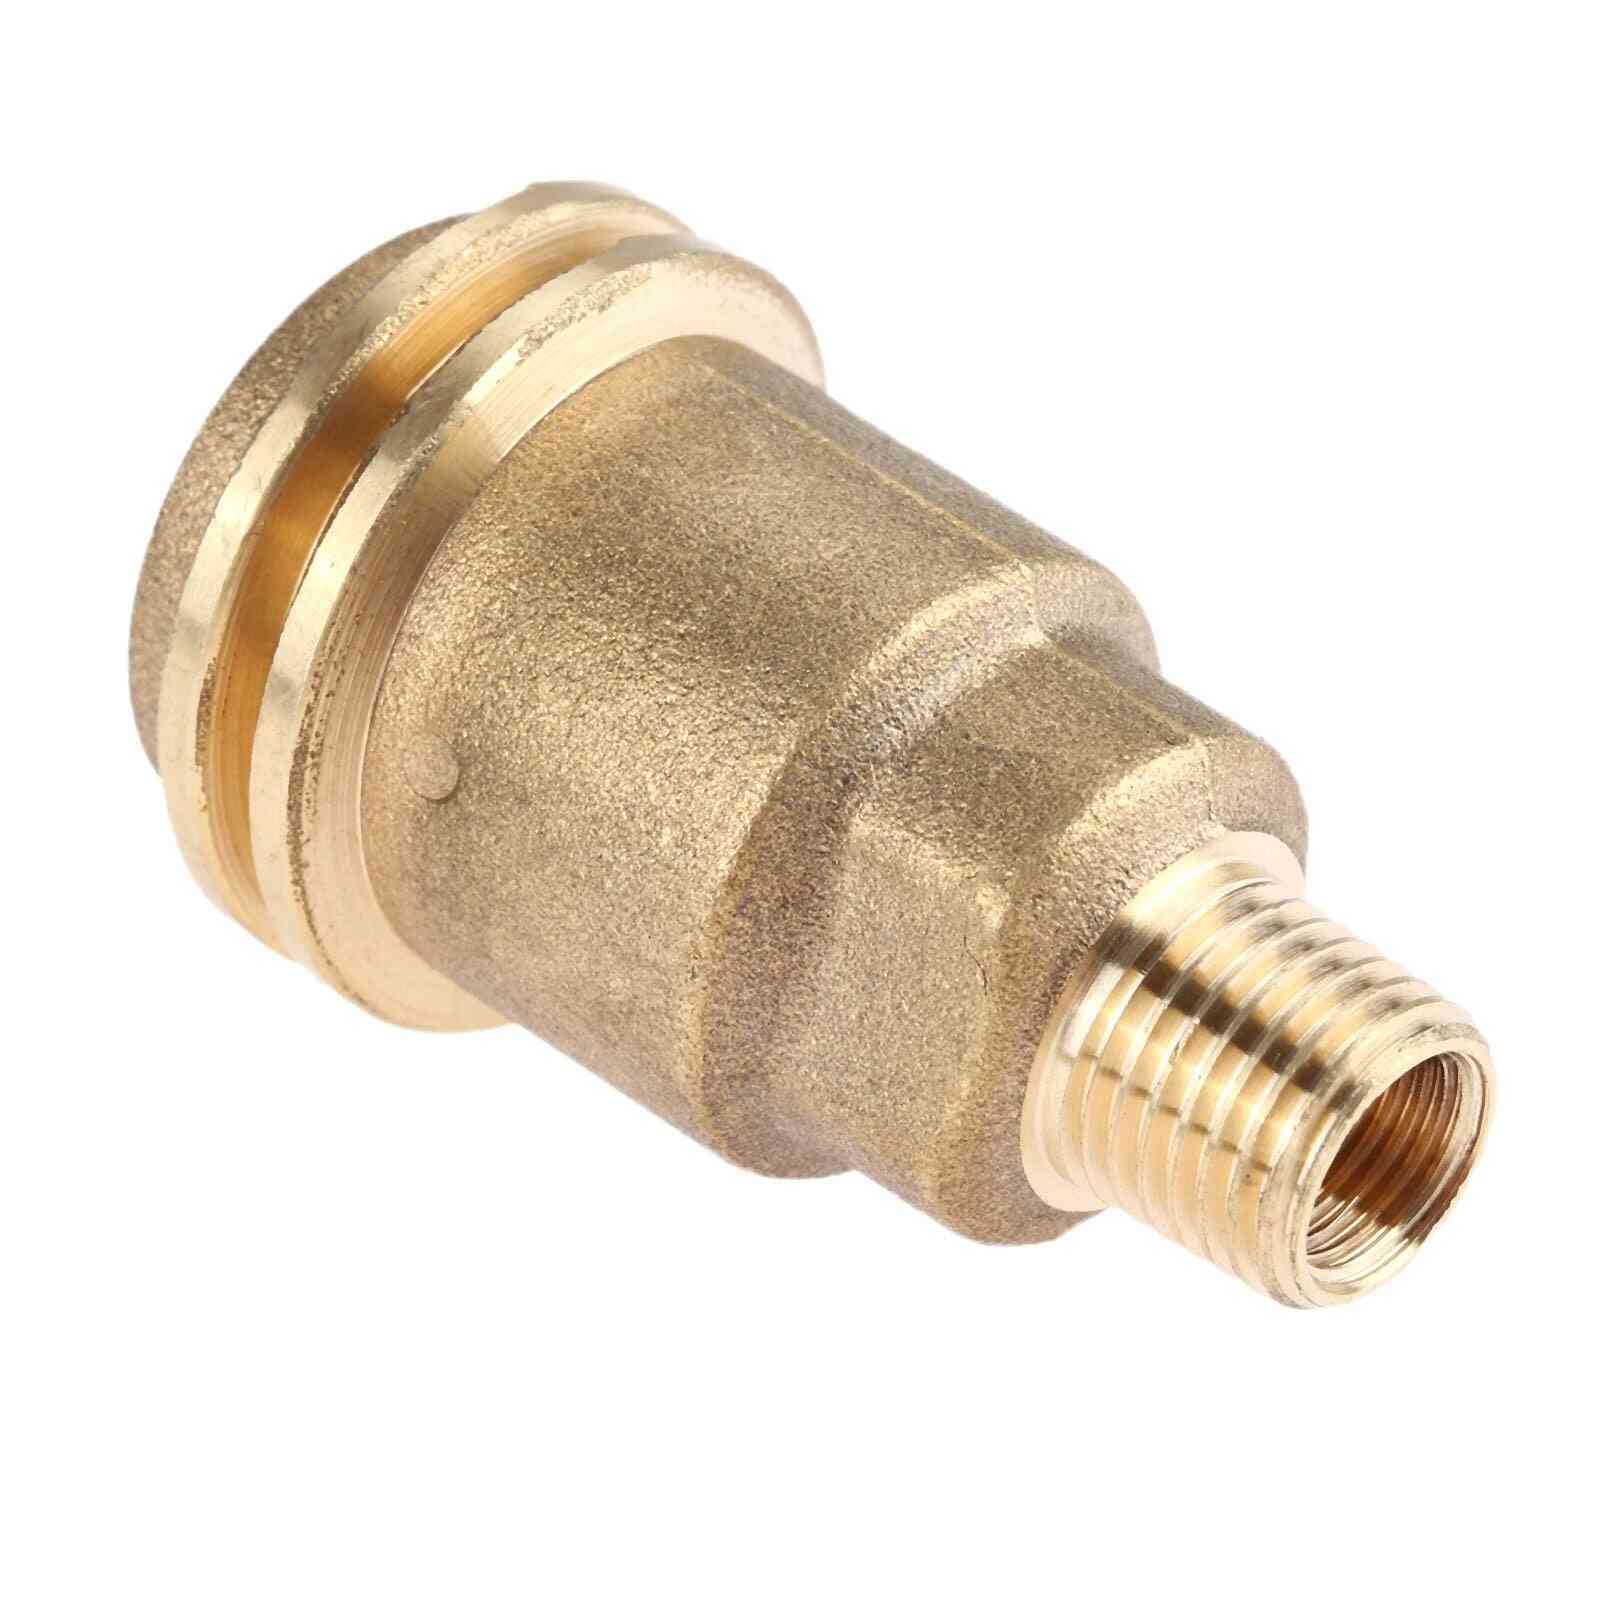 Brass Pipe Thread Adapter(male Qcc-1 To 1/4-inch Male).